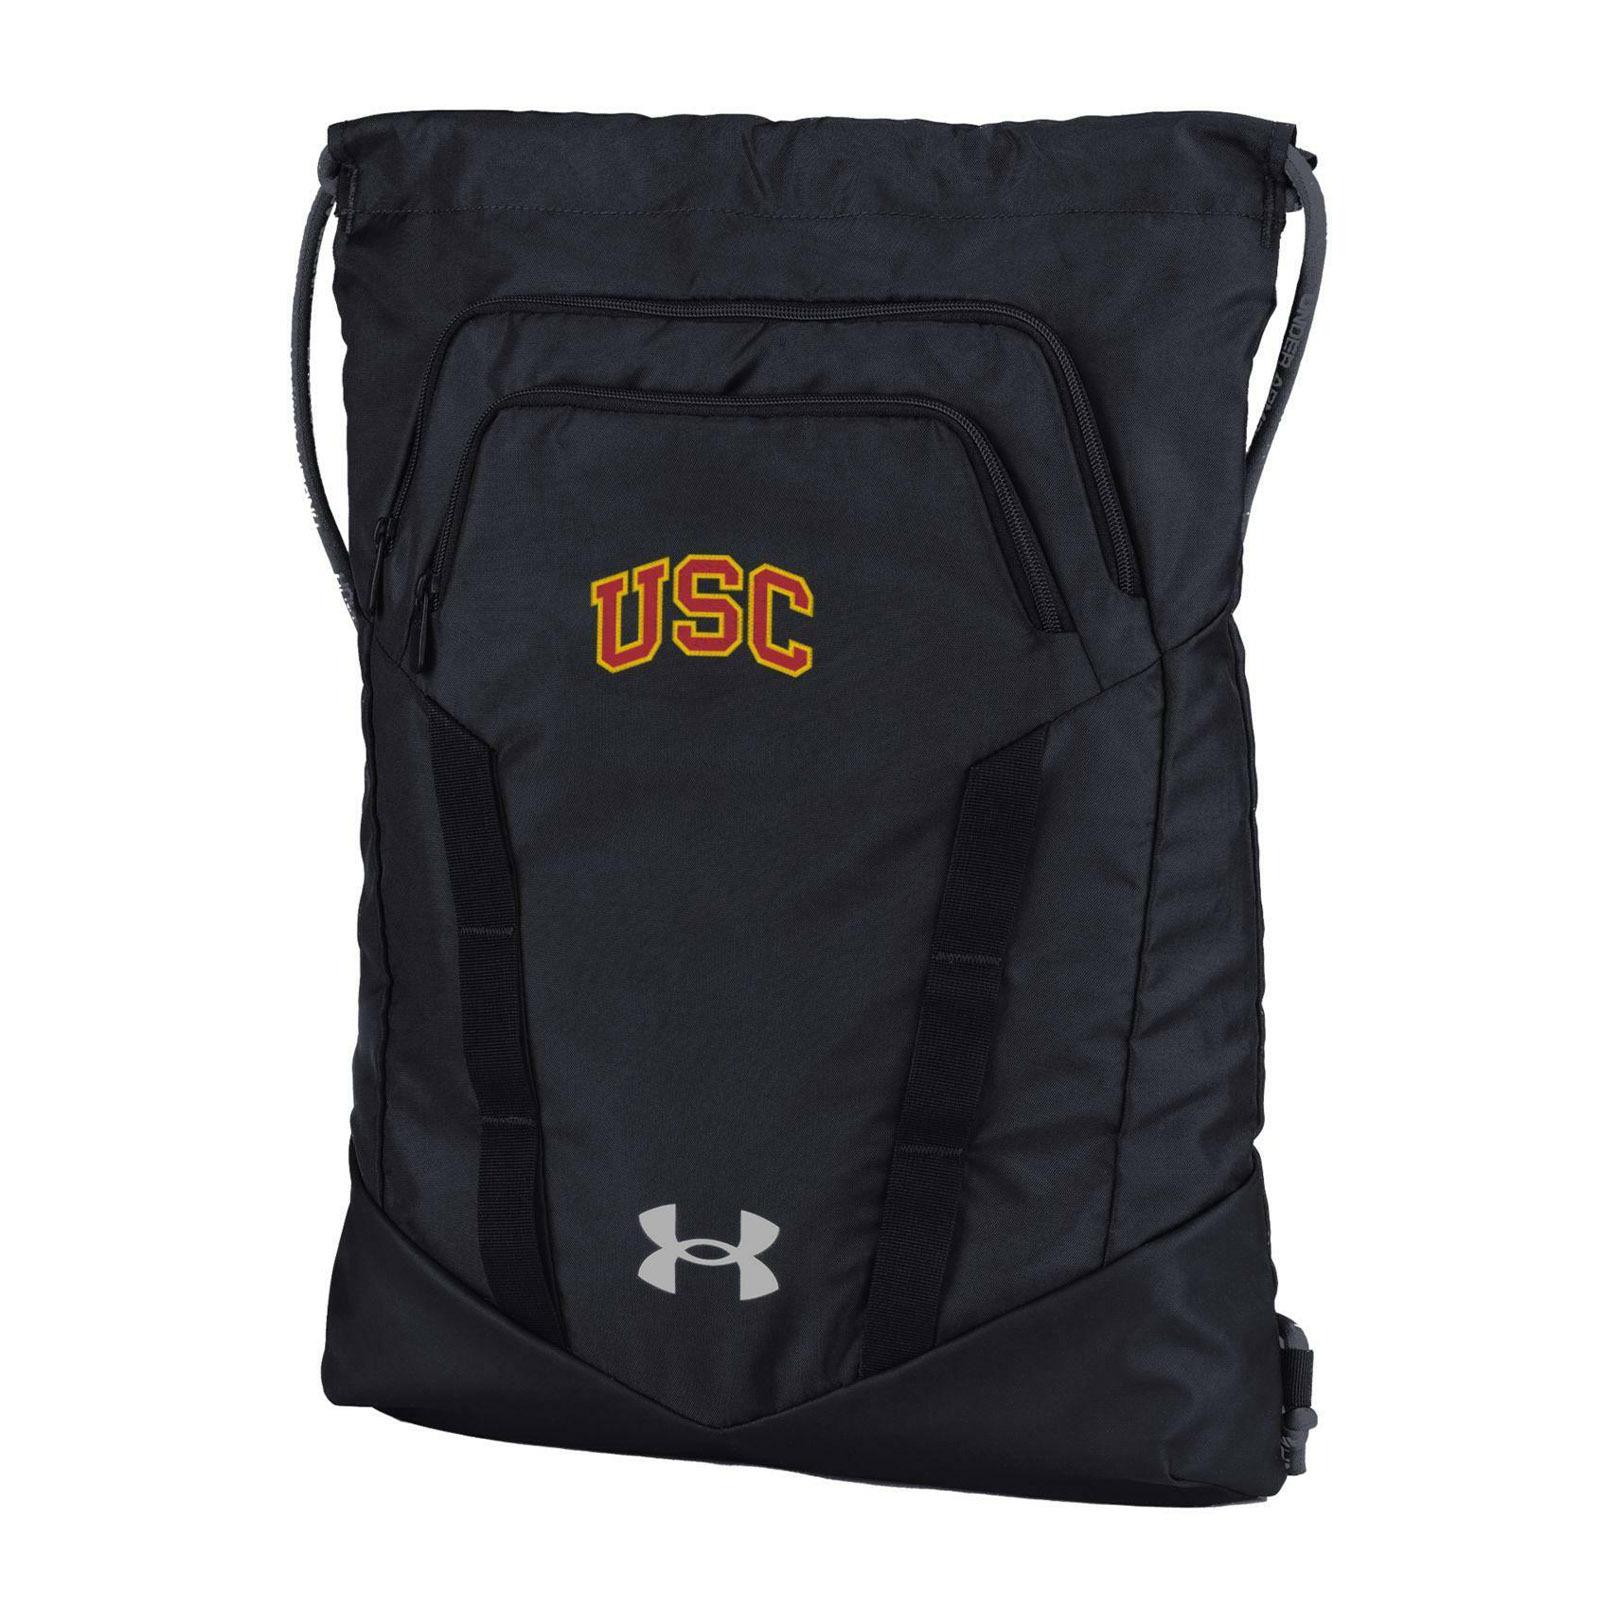 USC Under Armour Undeniable Sackpack Black image01